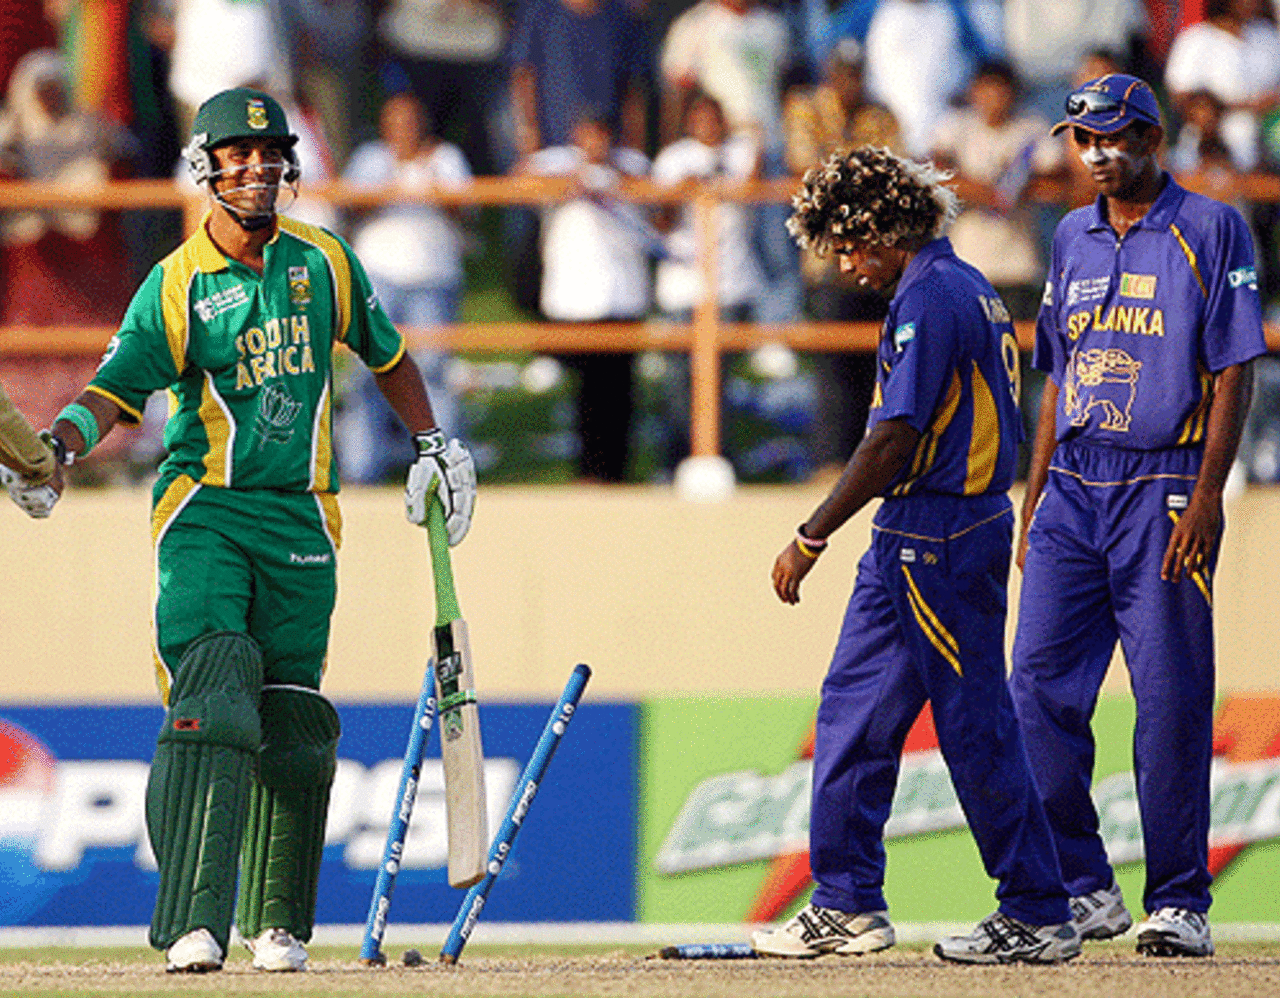 Lasith Malinga is disappointed after Robin Peterson edges four off his bowling to take South Africa to victory, South Africa v Sri Lanka, Super Eights, Guyana, March 28, 2007